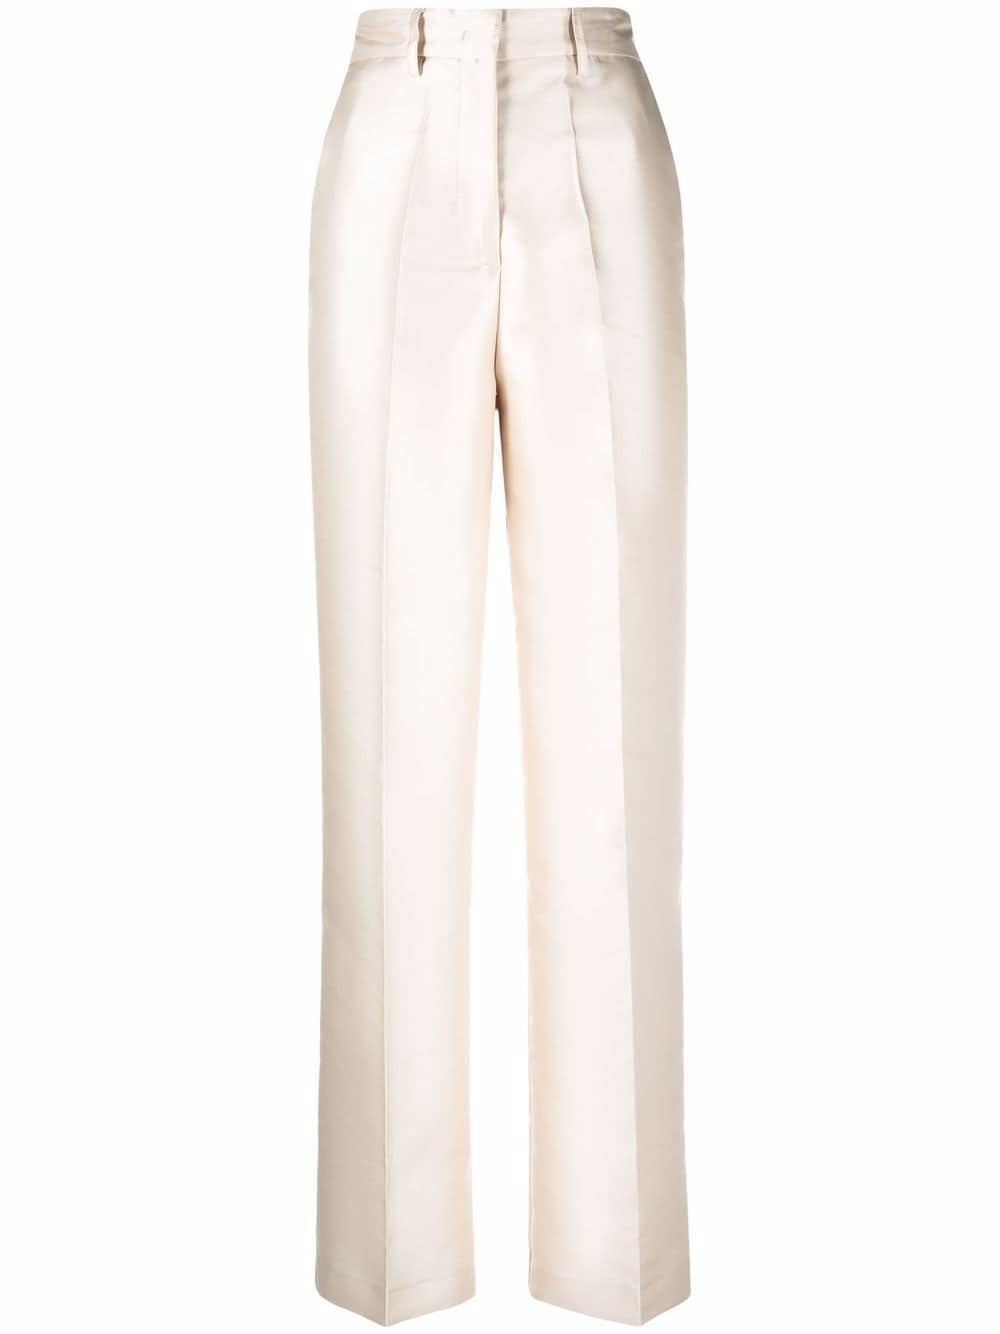 Shop Blanca Vita Pareskia straight-leg trousers with Express Delivery ...